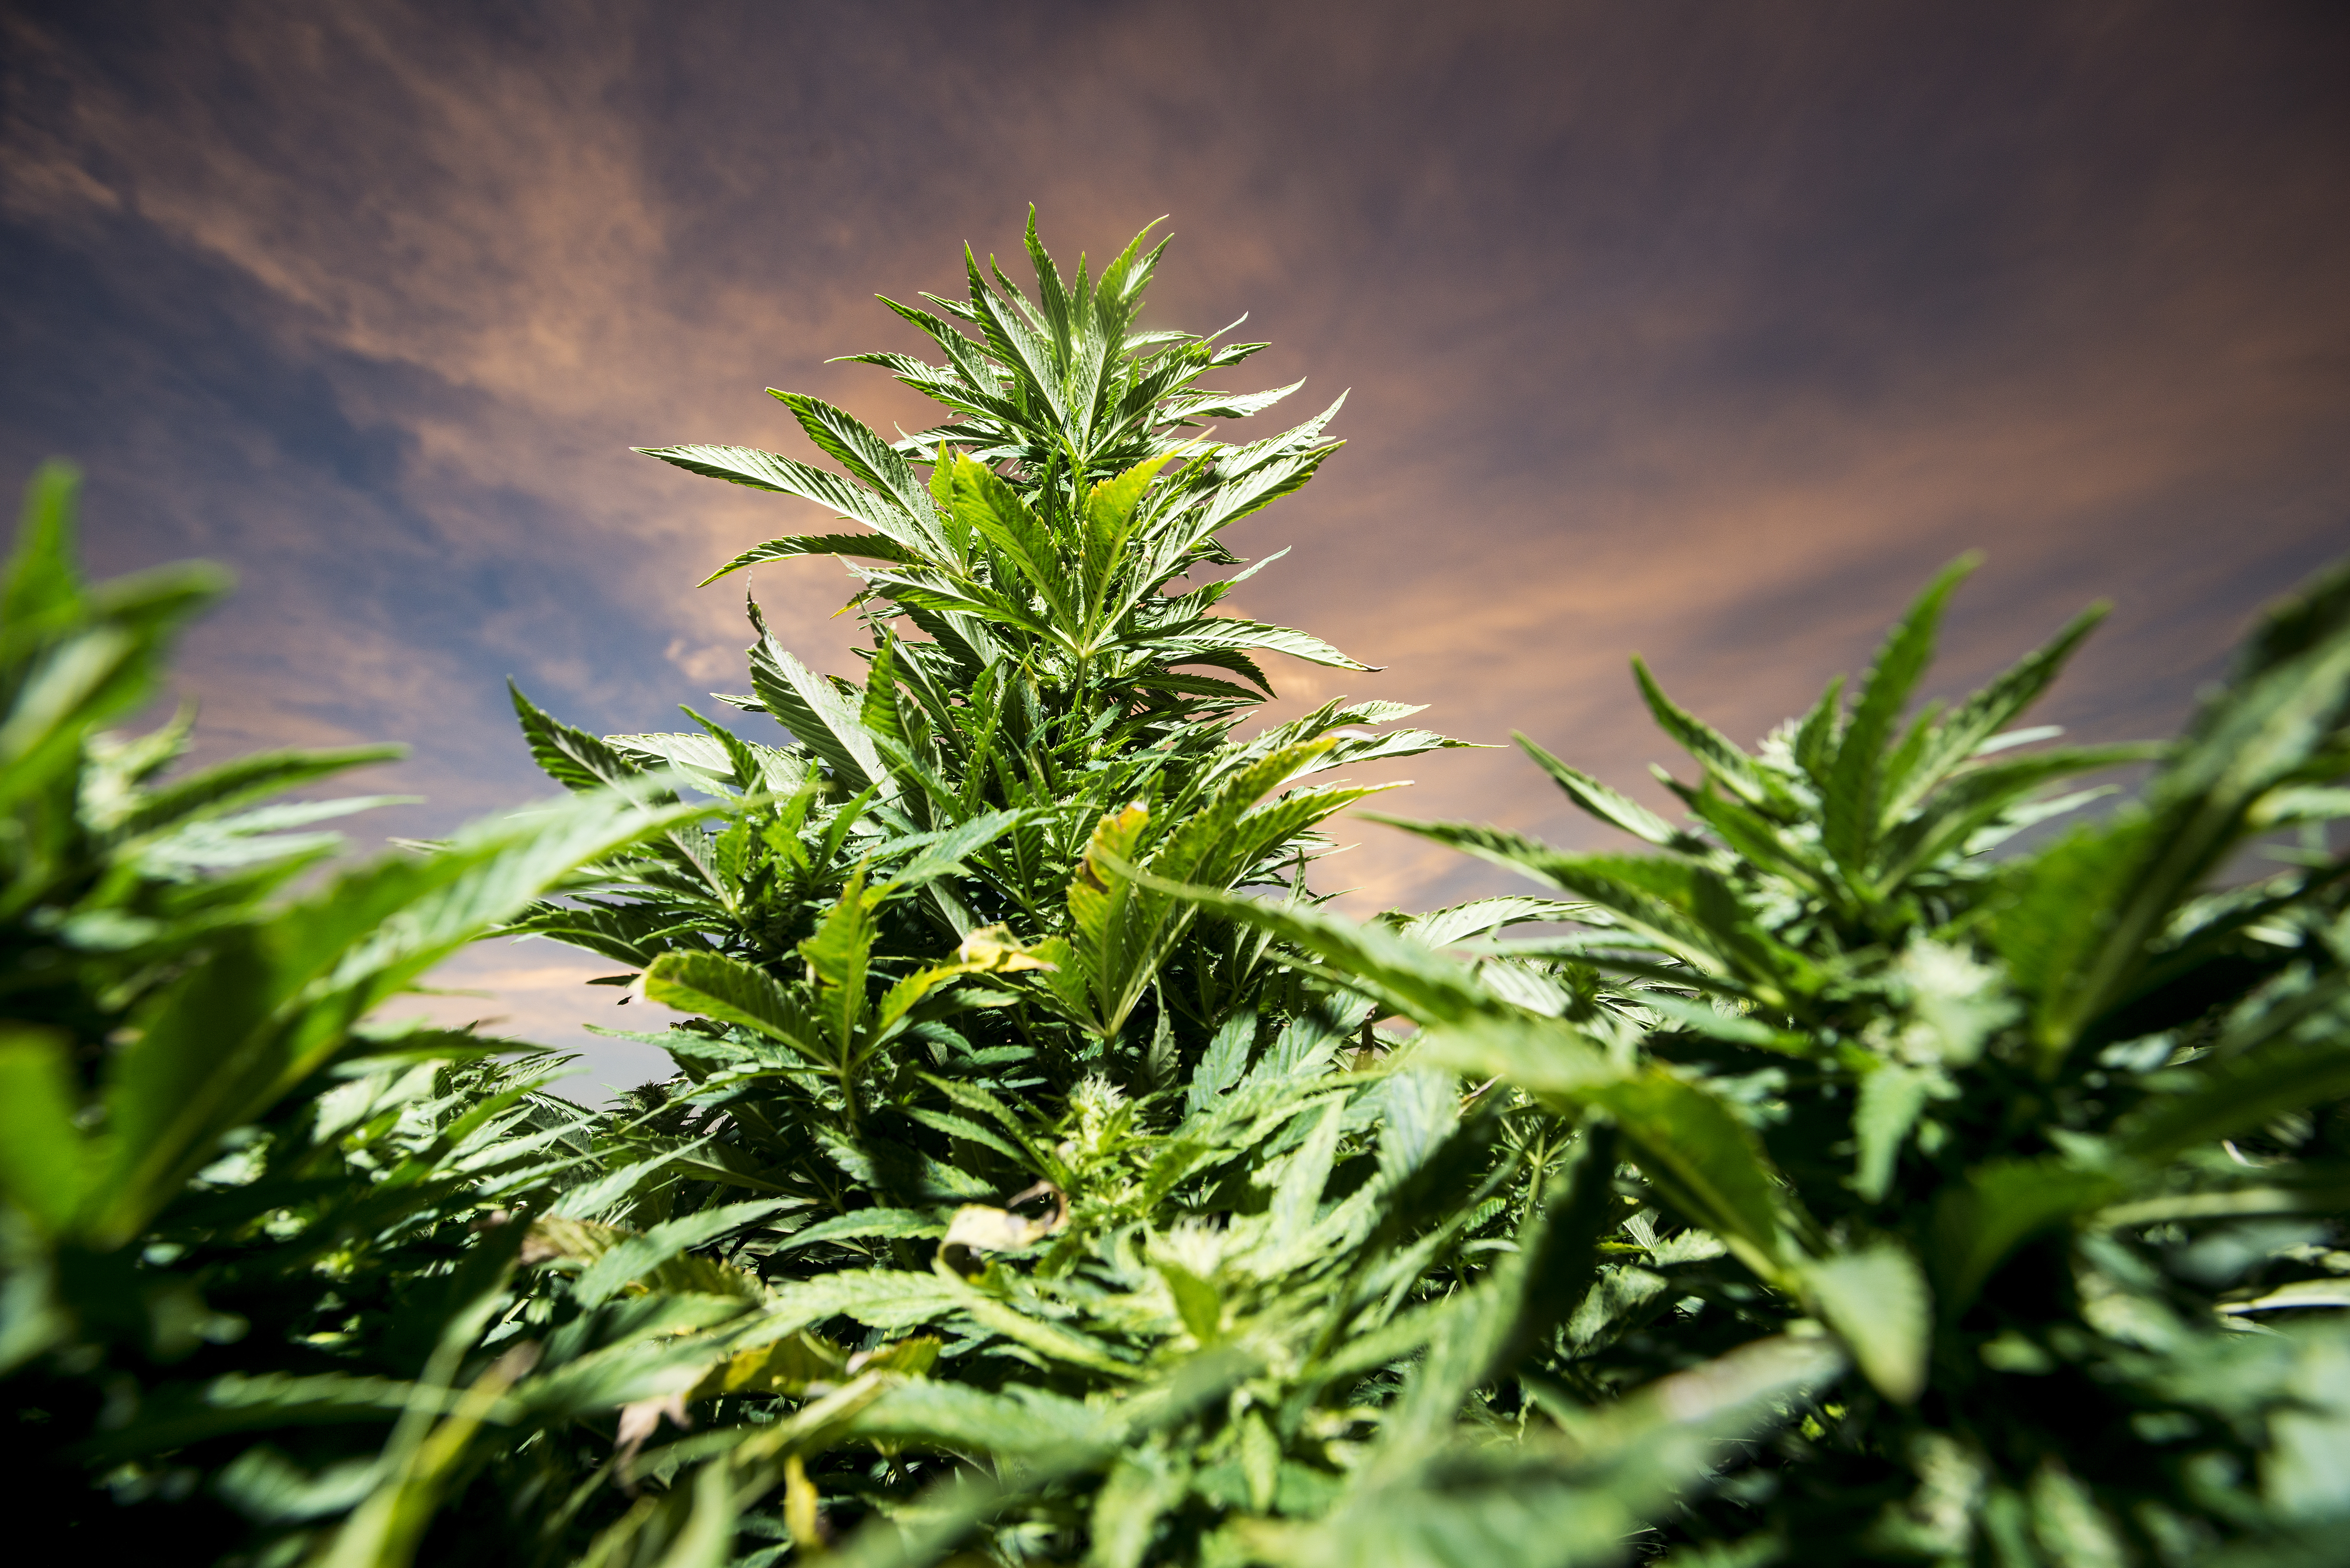 Industrial grade hemp grows on the Stanley Brother's farm near Wray, Colo., Sept. 22, 2014. (Matt Nager for TIME)